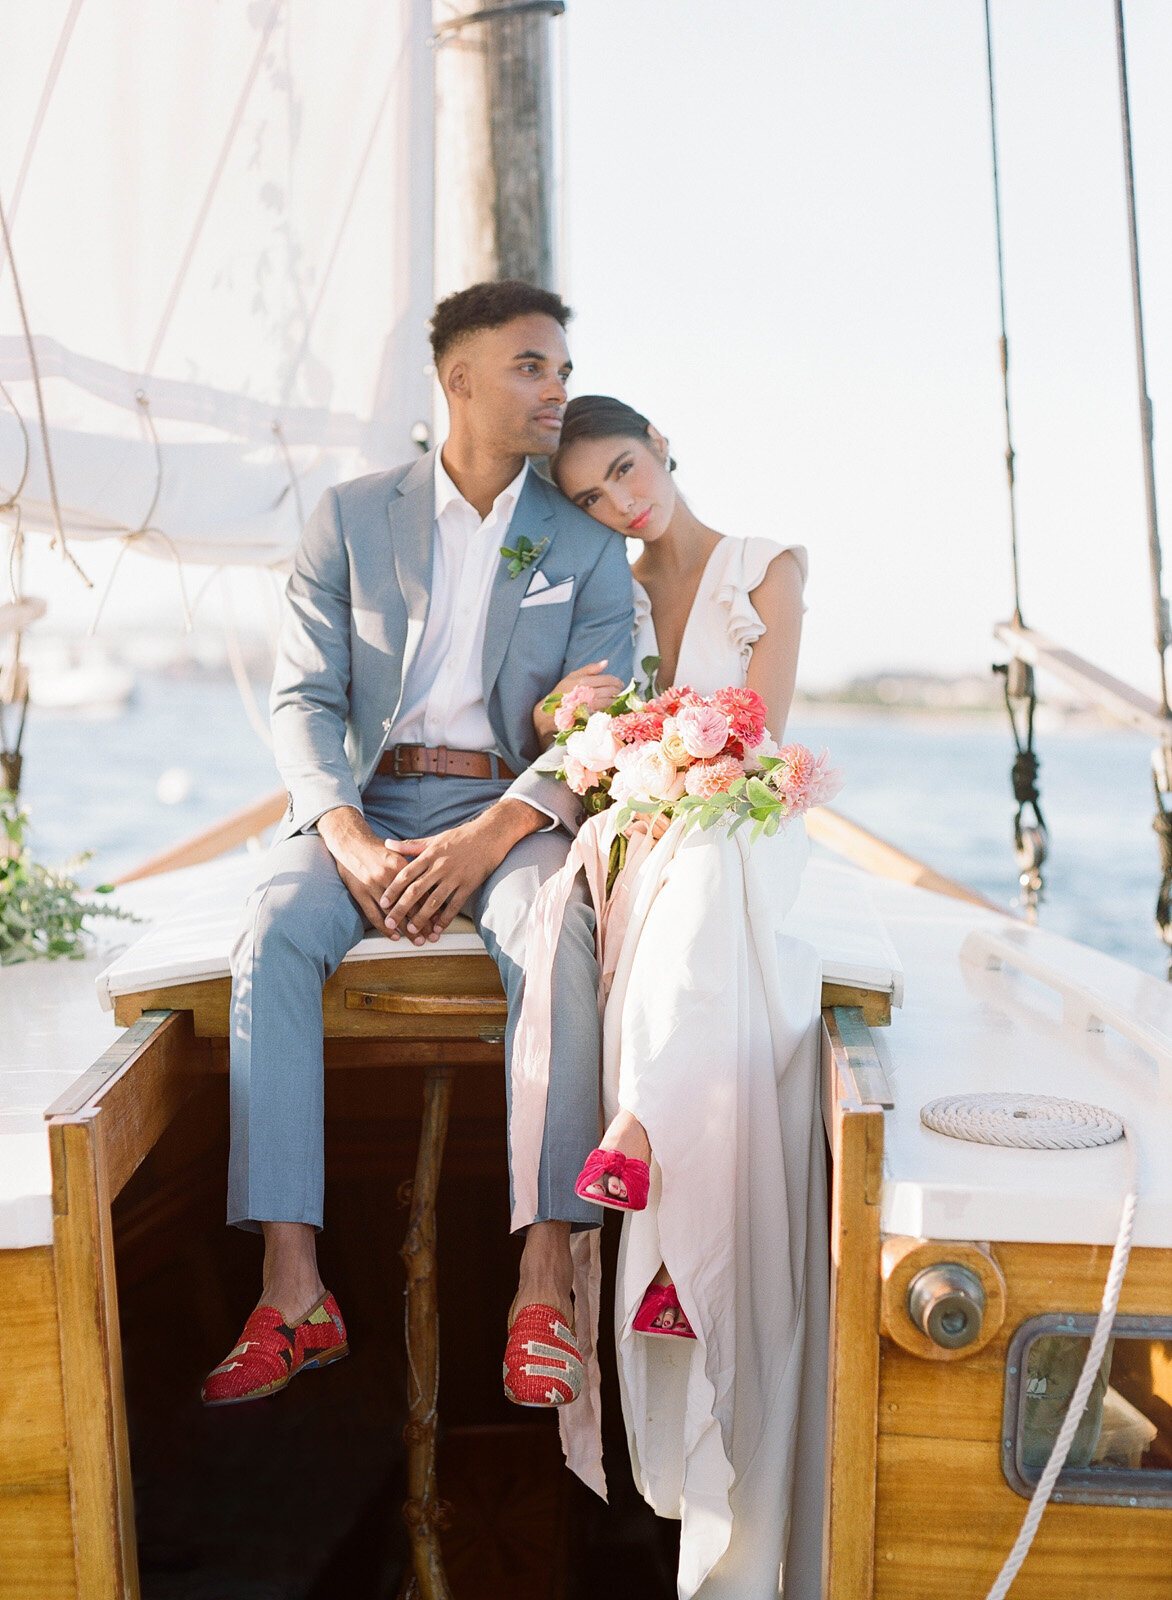 Kate-Murtaugh-Events-elopement-wedding-planner-Boston-Harbor-sailing-sail-boat-yacht-greenery-water-blue-suit-casual